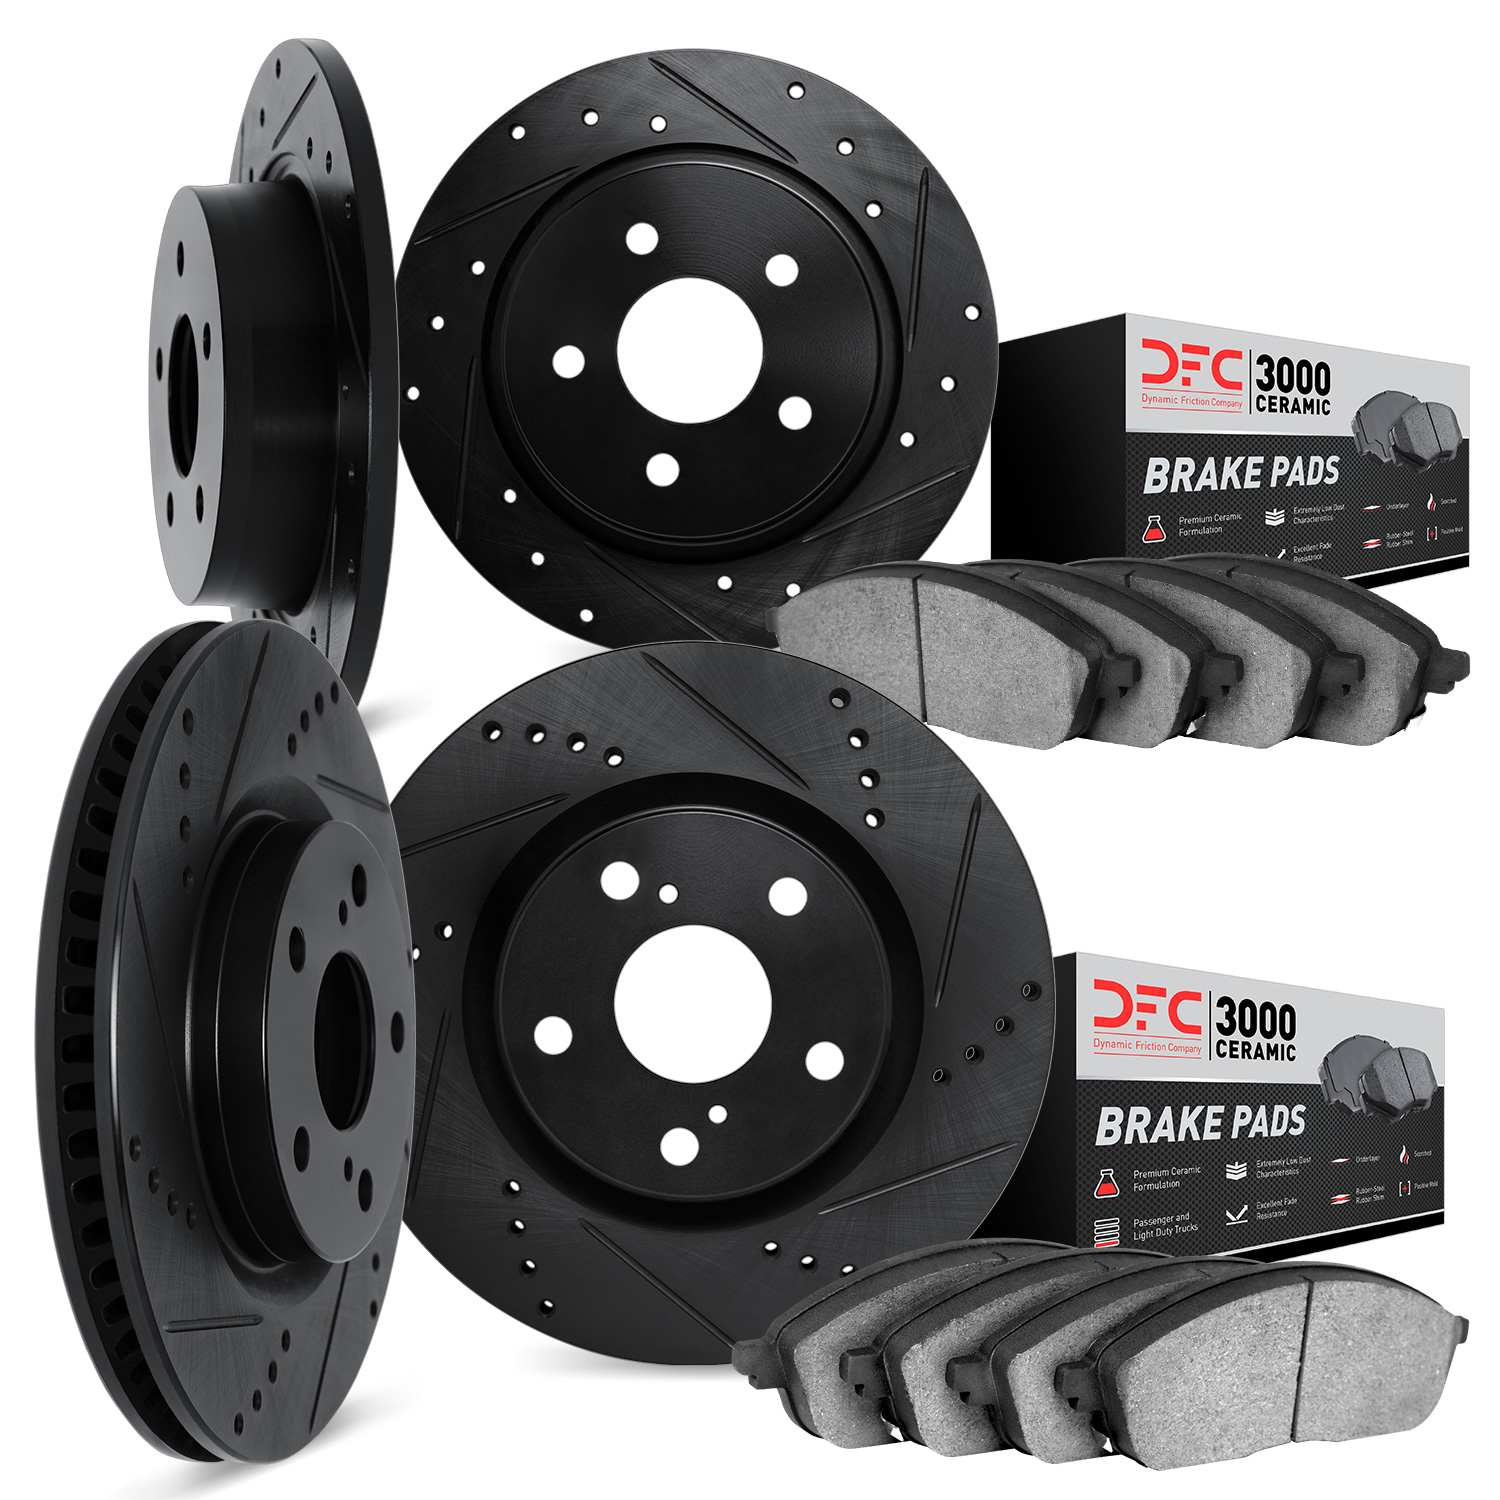 8304-59026 Drilled/Slotted Brake Rotors with 3000-Series Ceramic Brake Pads Kit [Black], 2003-2006 Acura/Honda, Position: Front